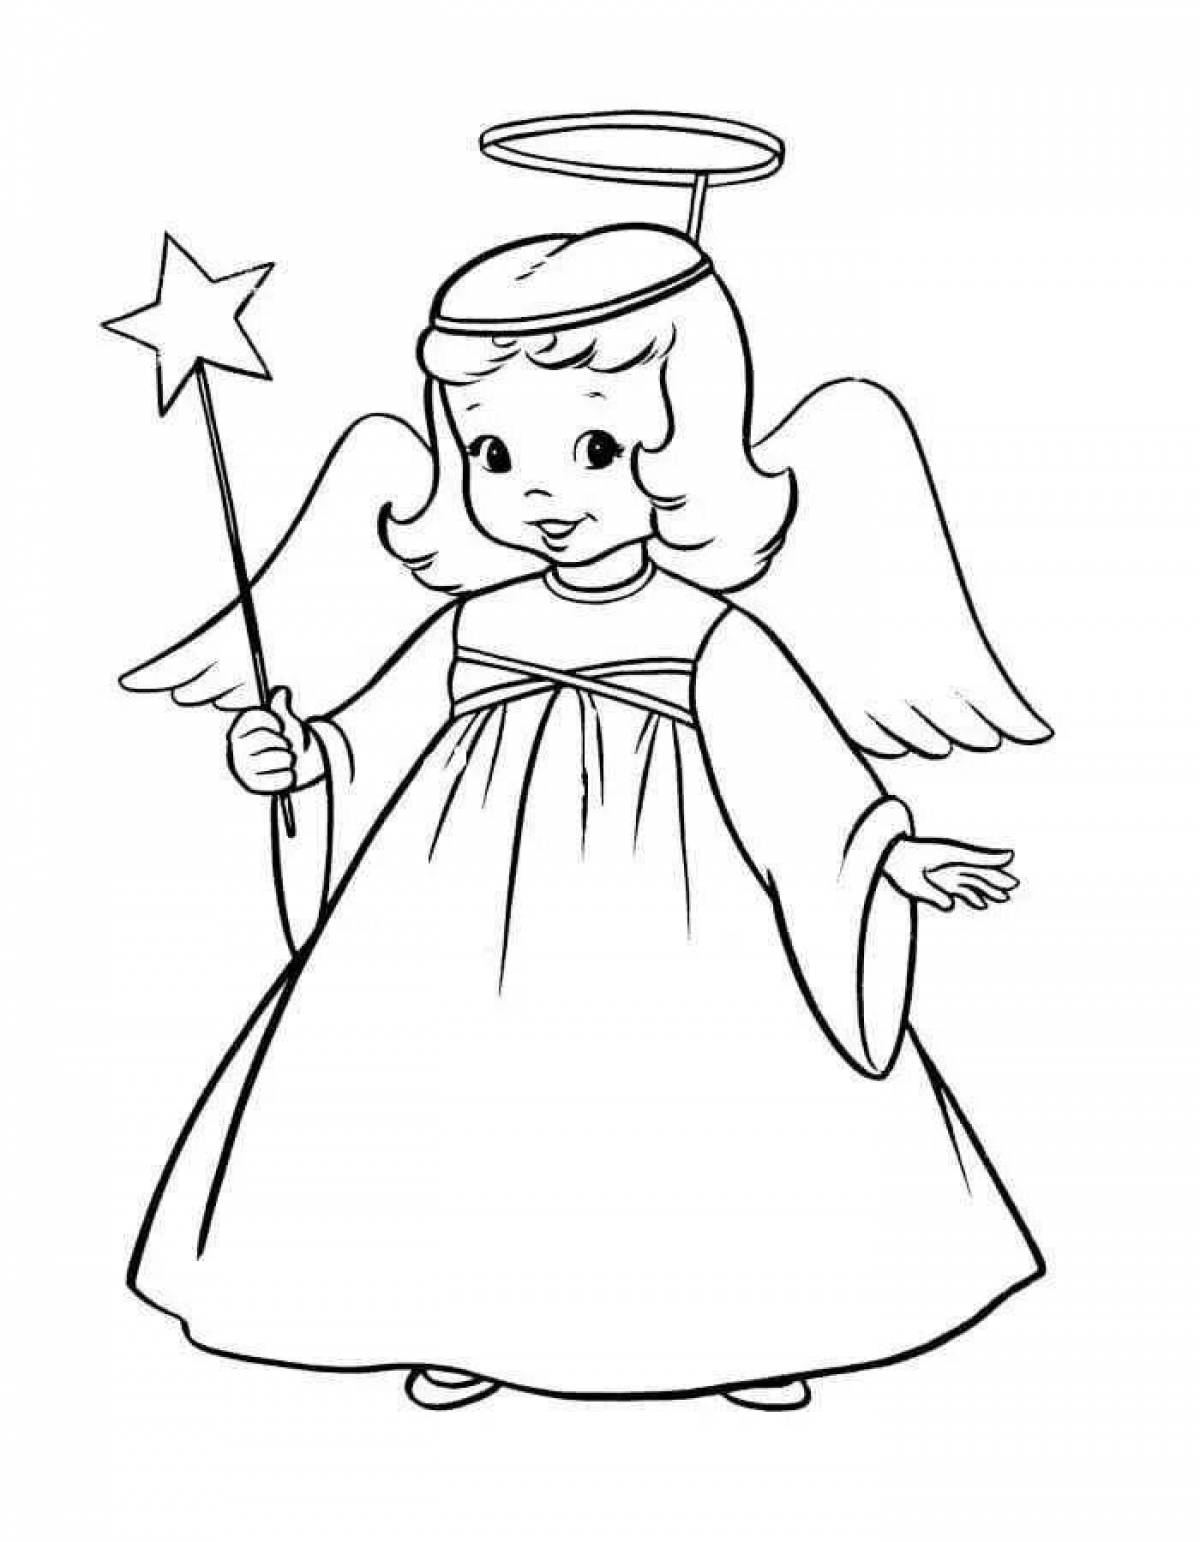 Adorable little angel coloring book